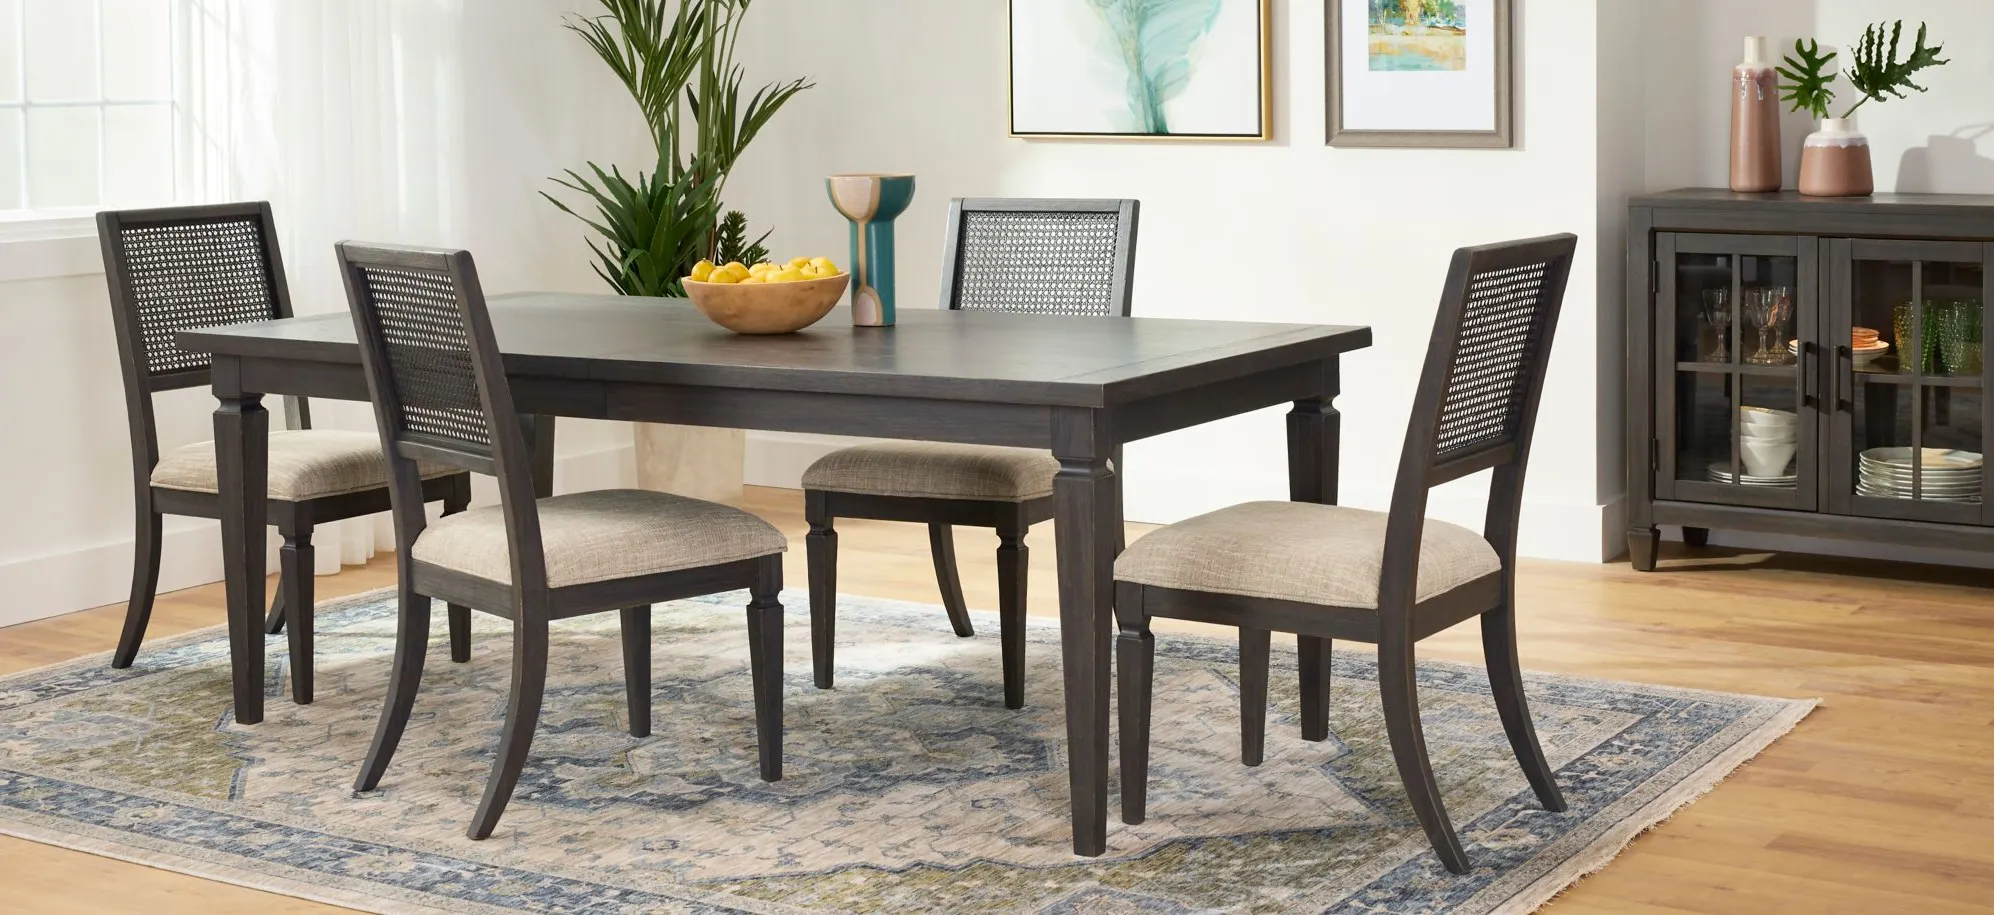 Dutton 5pc Dining Set in Blackstone by Liberty Furniture